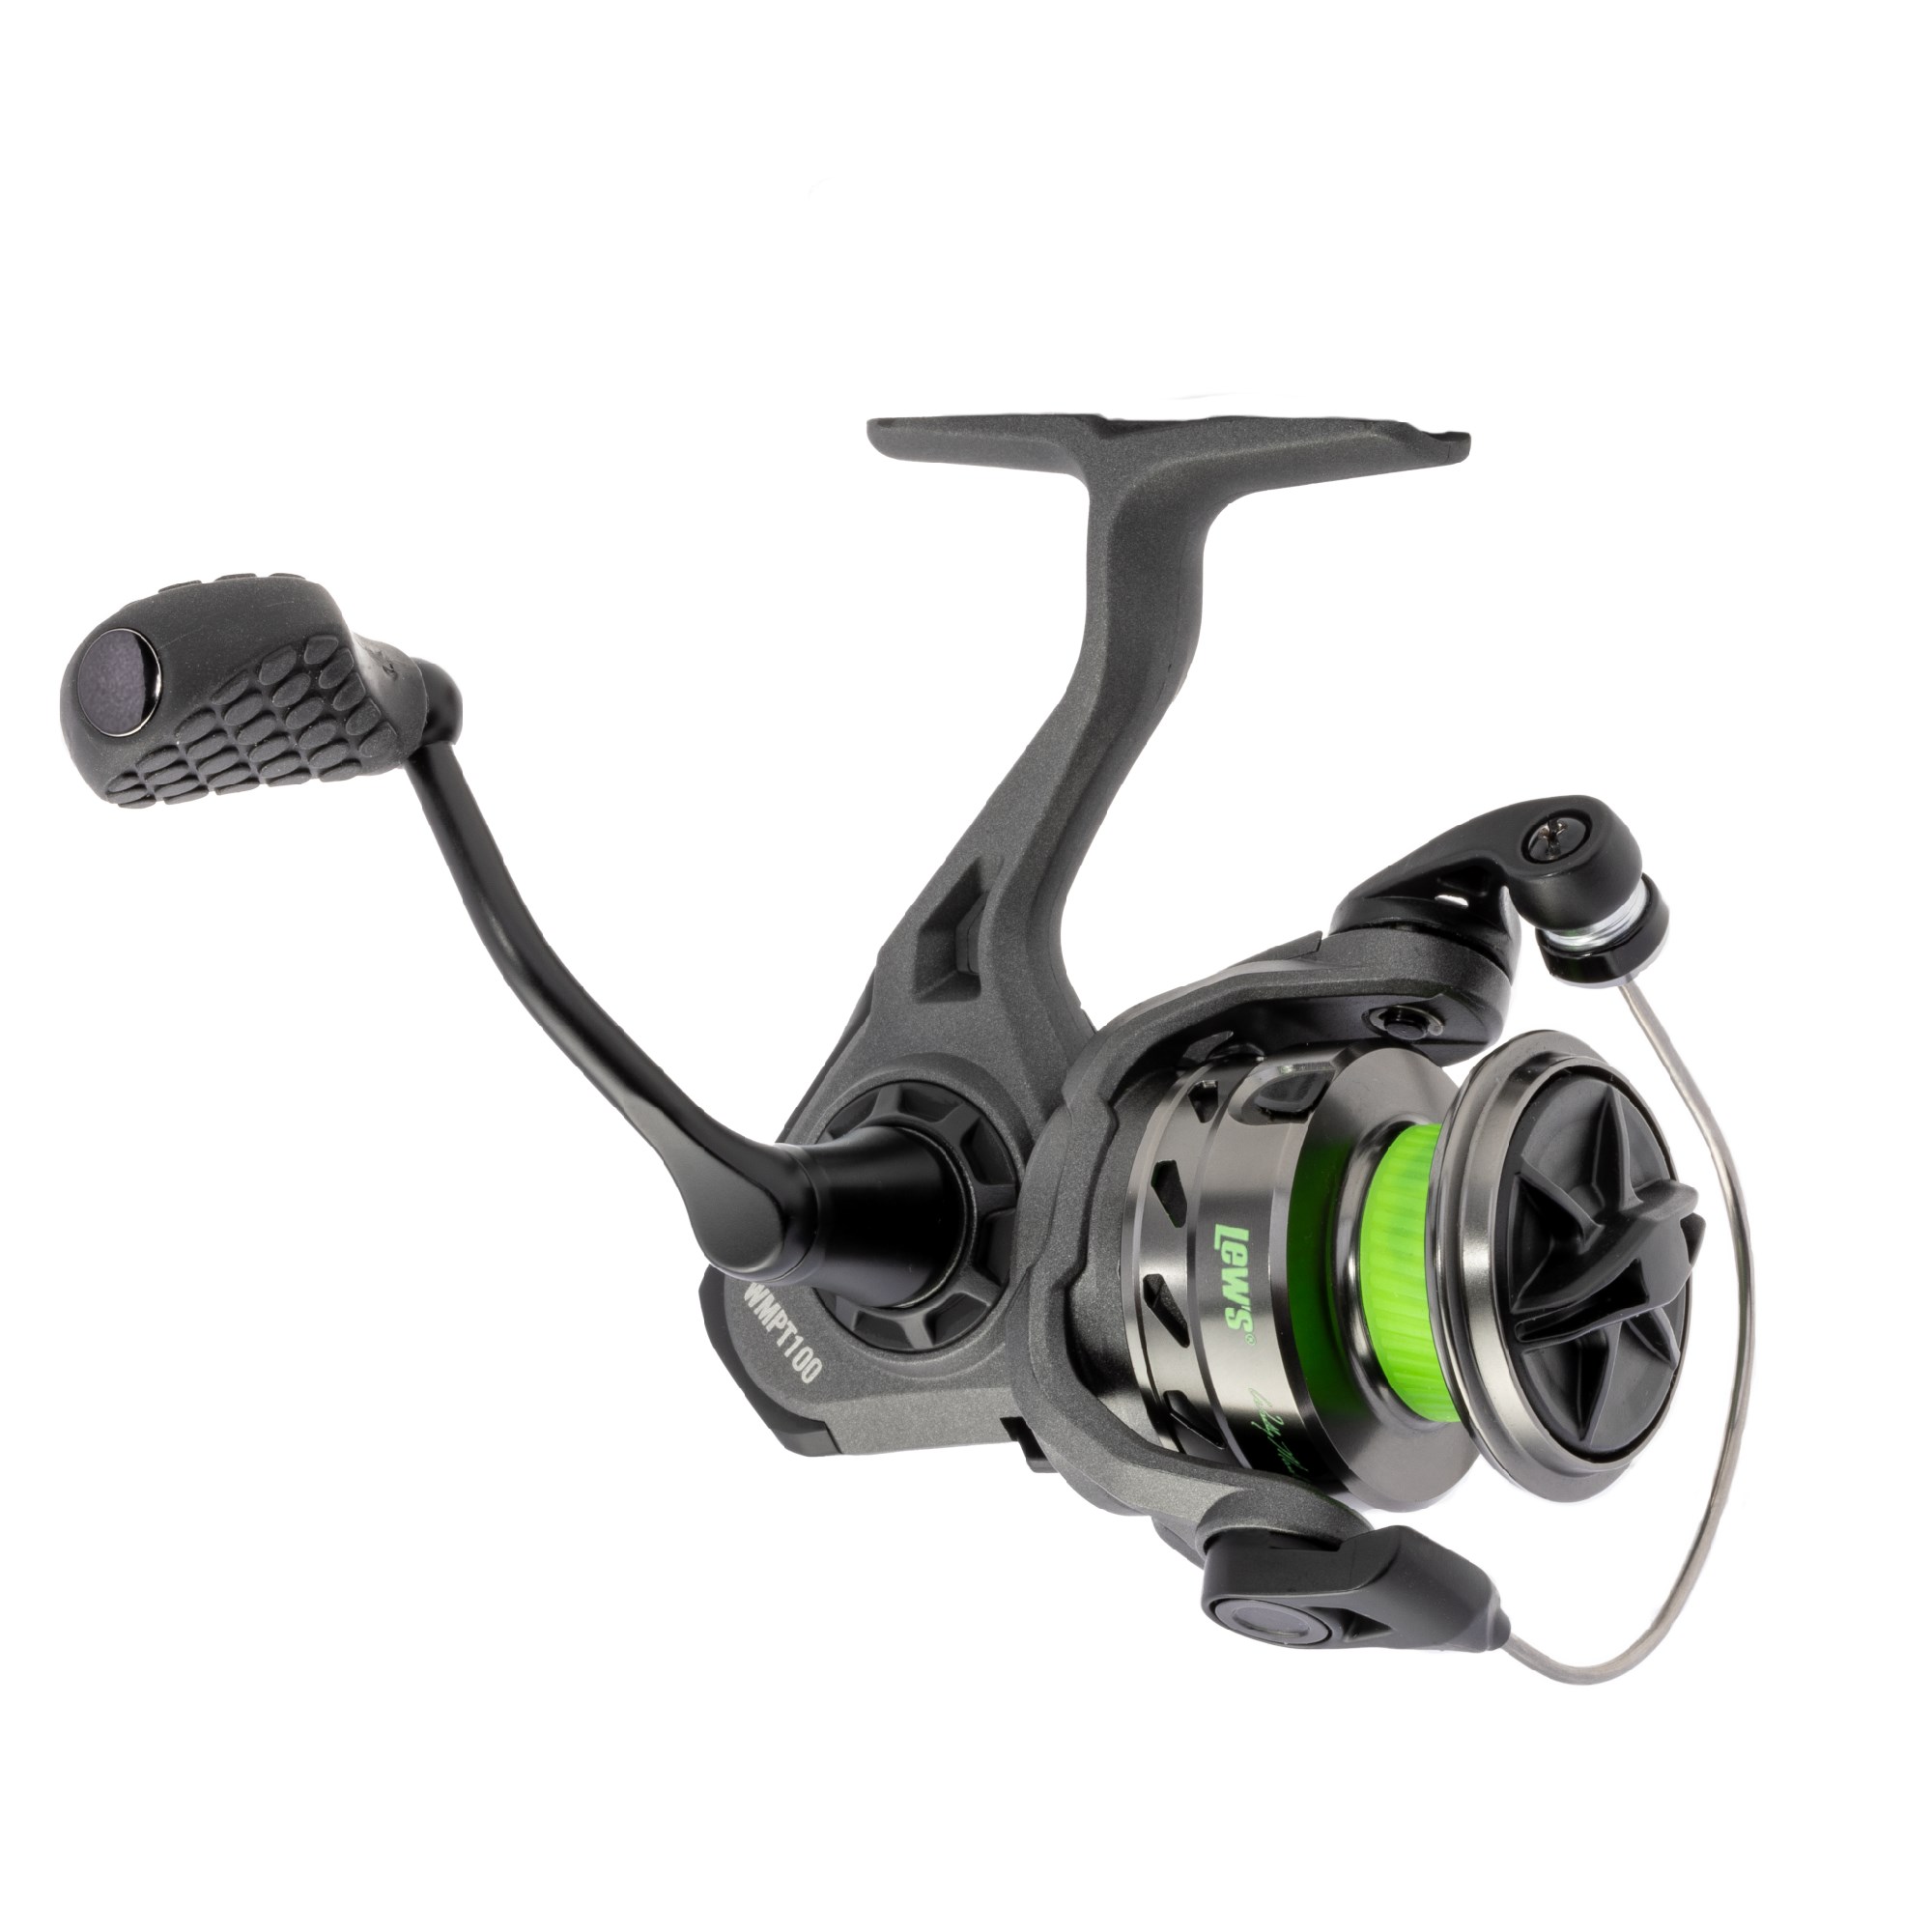 Mr. Crappie Wally Marshall Pro Target Spin Reel WMPT100 with Free S&H —  CampSaver